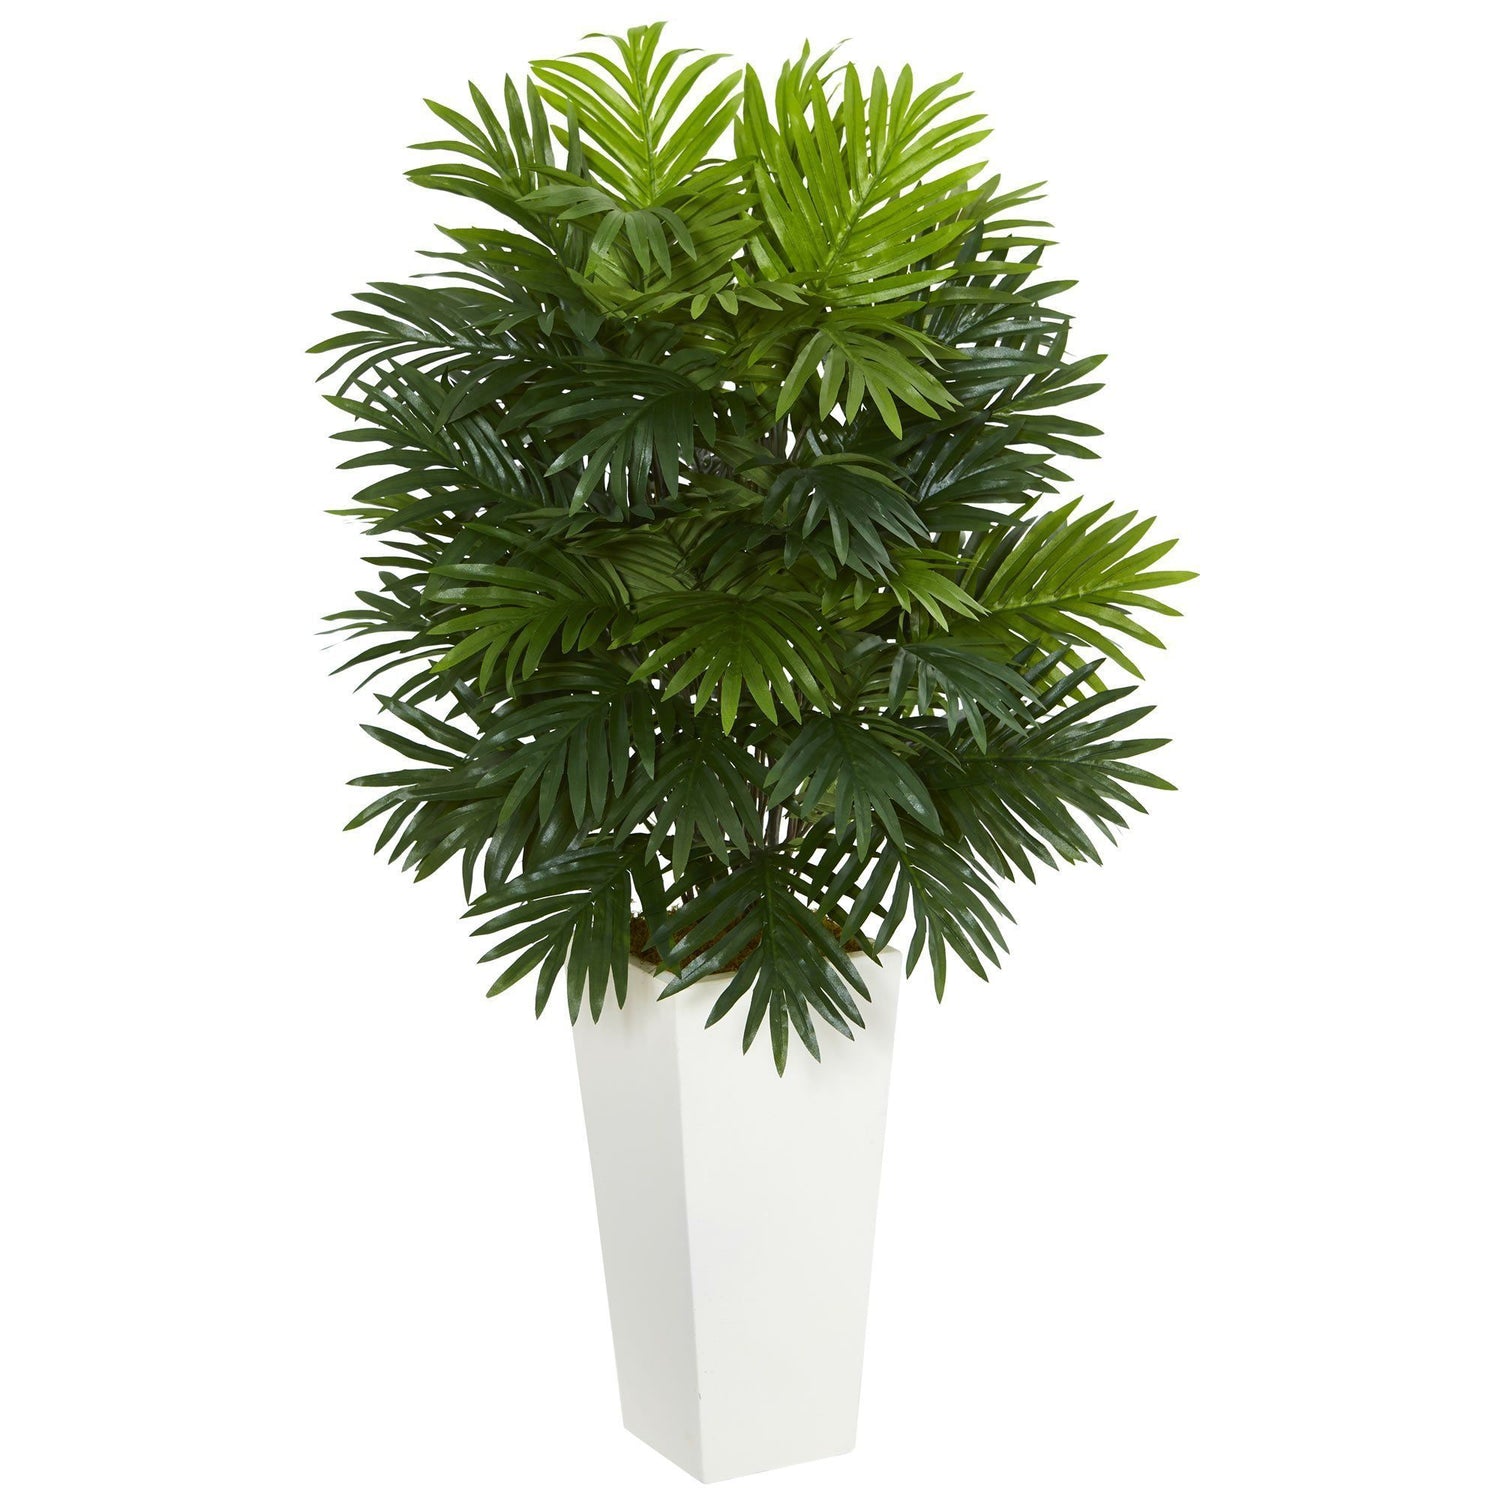 40" Areca Palm Artificial Plant in White Tower Planter"